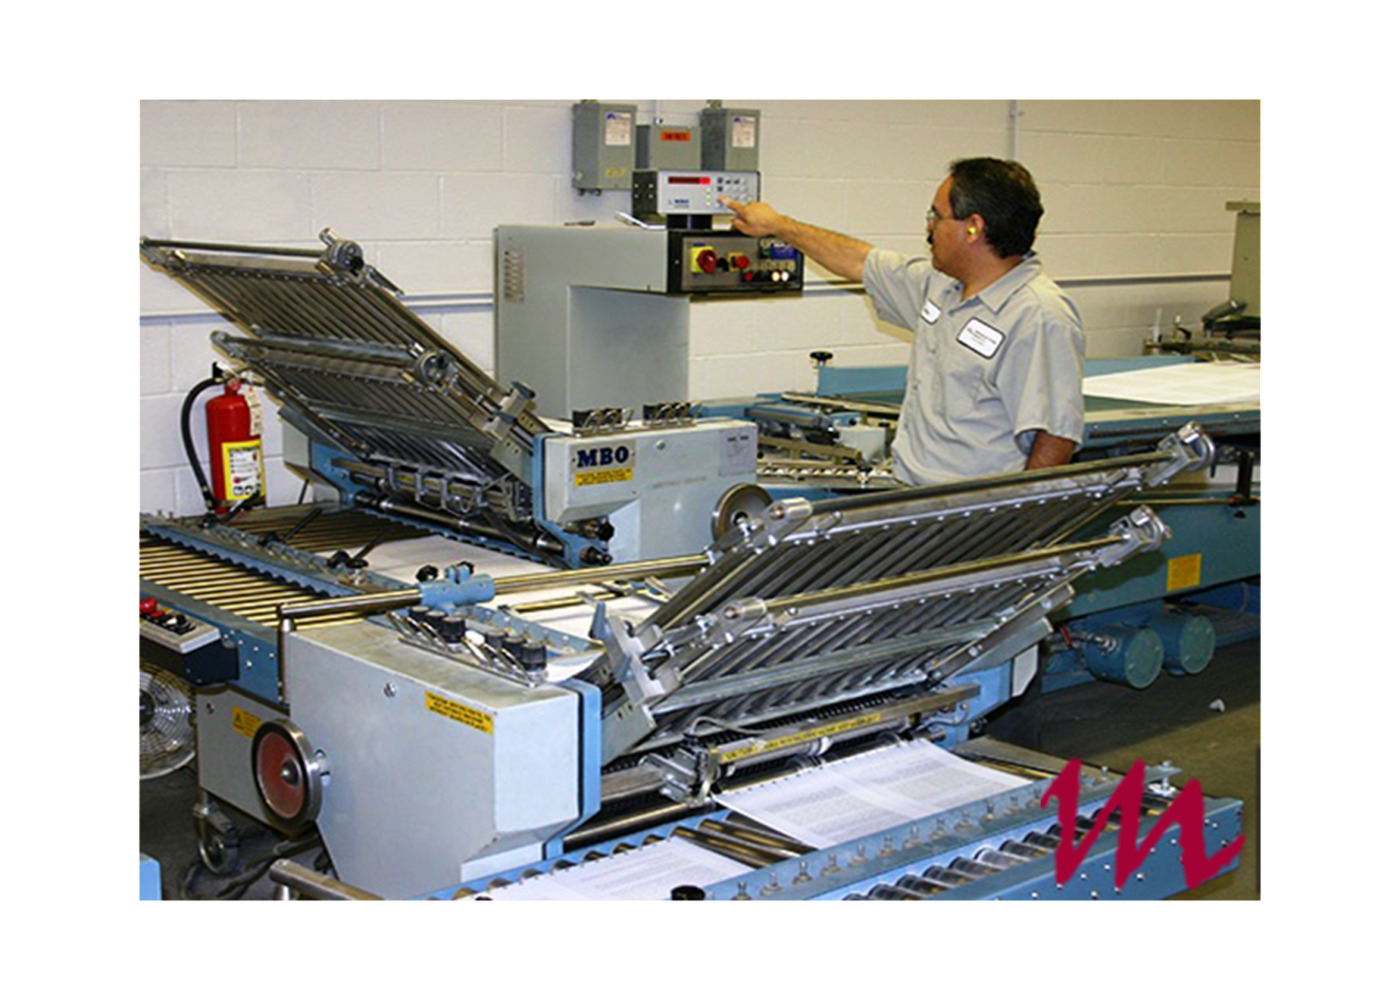 MidAmerican Printing Systems has been serving the community since 1985. It is considered one of the most successful commercial printing services based in Chicago